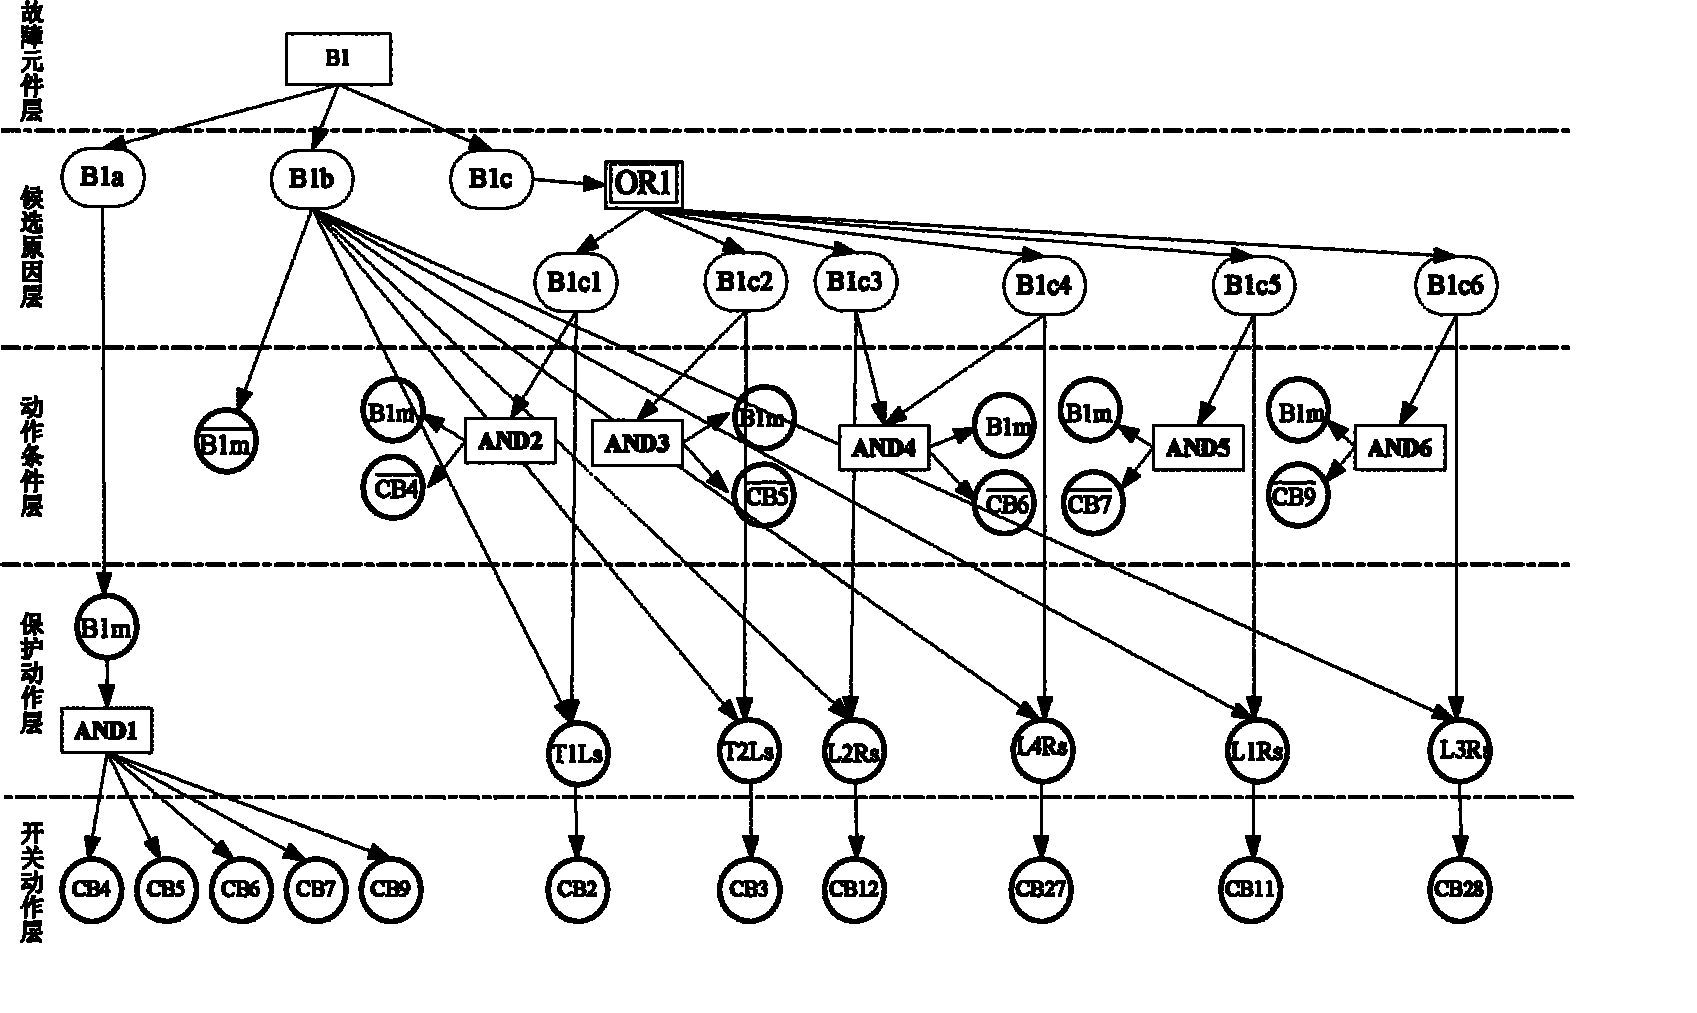 Regional electric network failure diagnosis method based on five-layer and three-region cause and effect rule network